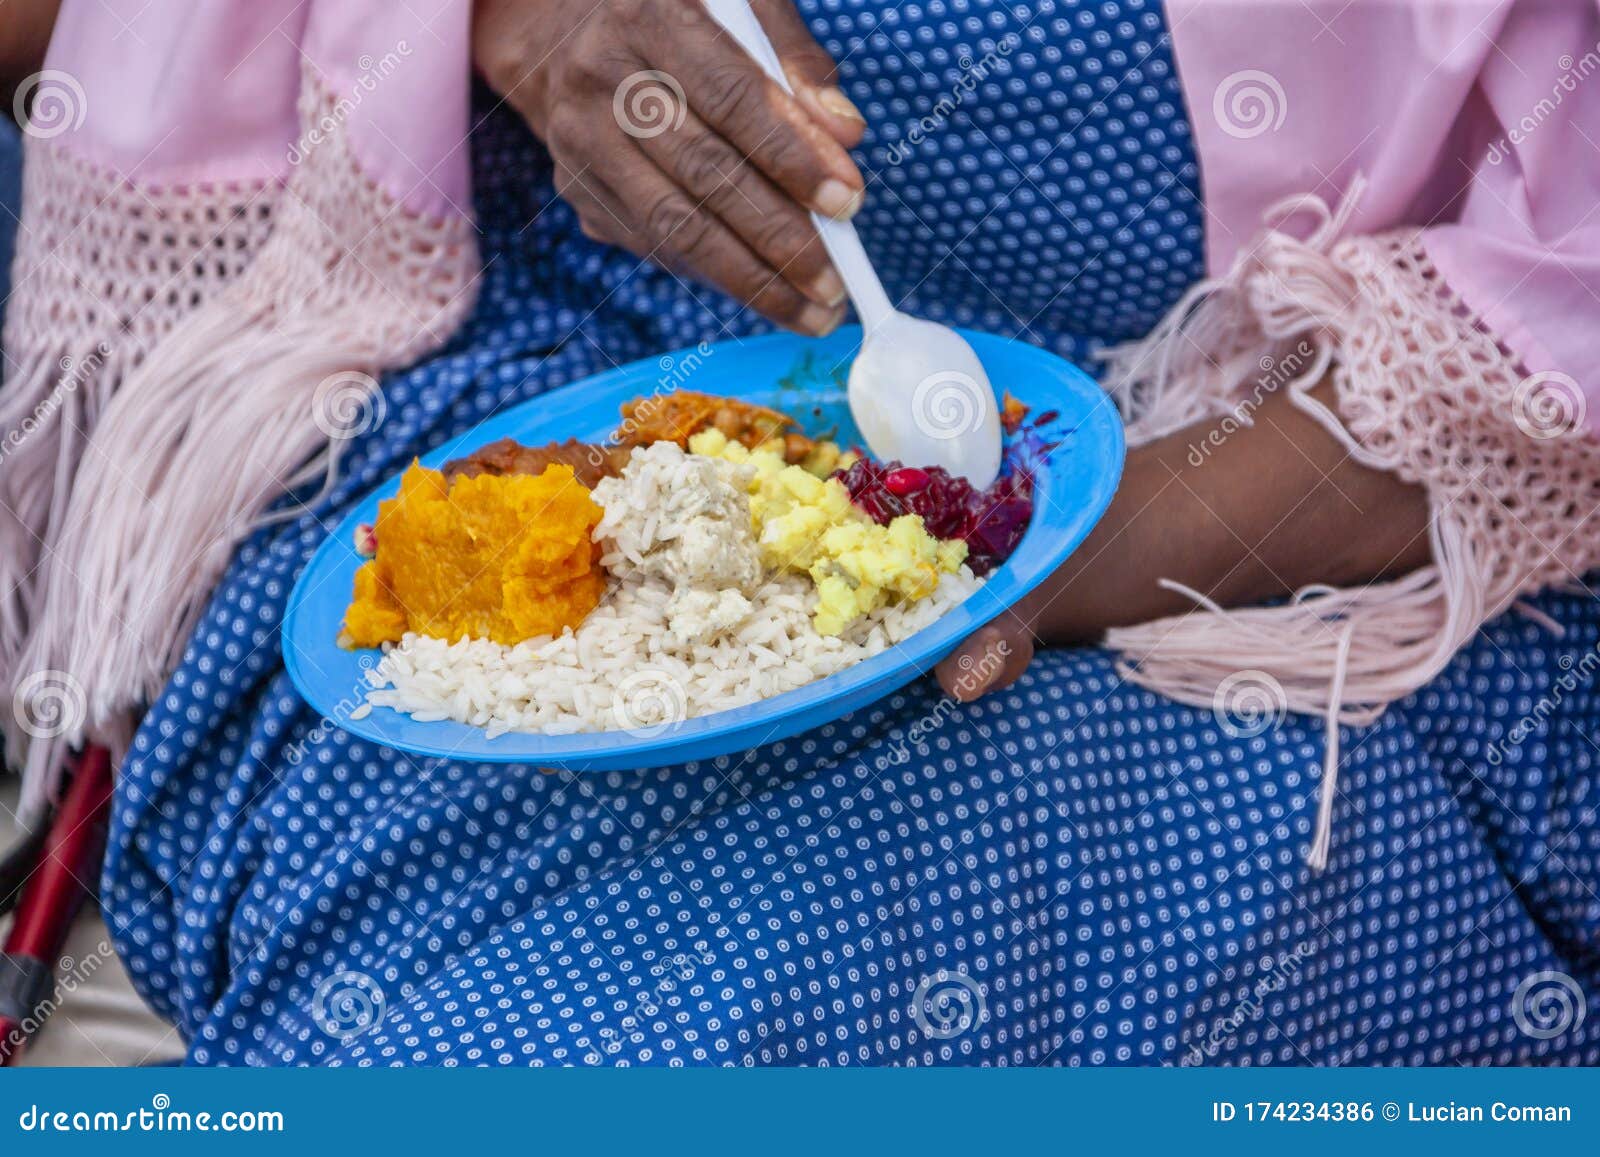 african woman having lunch